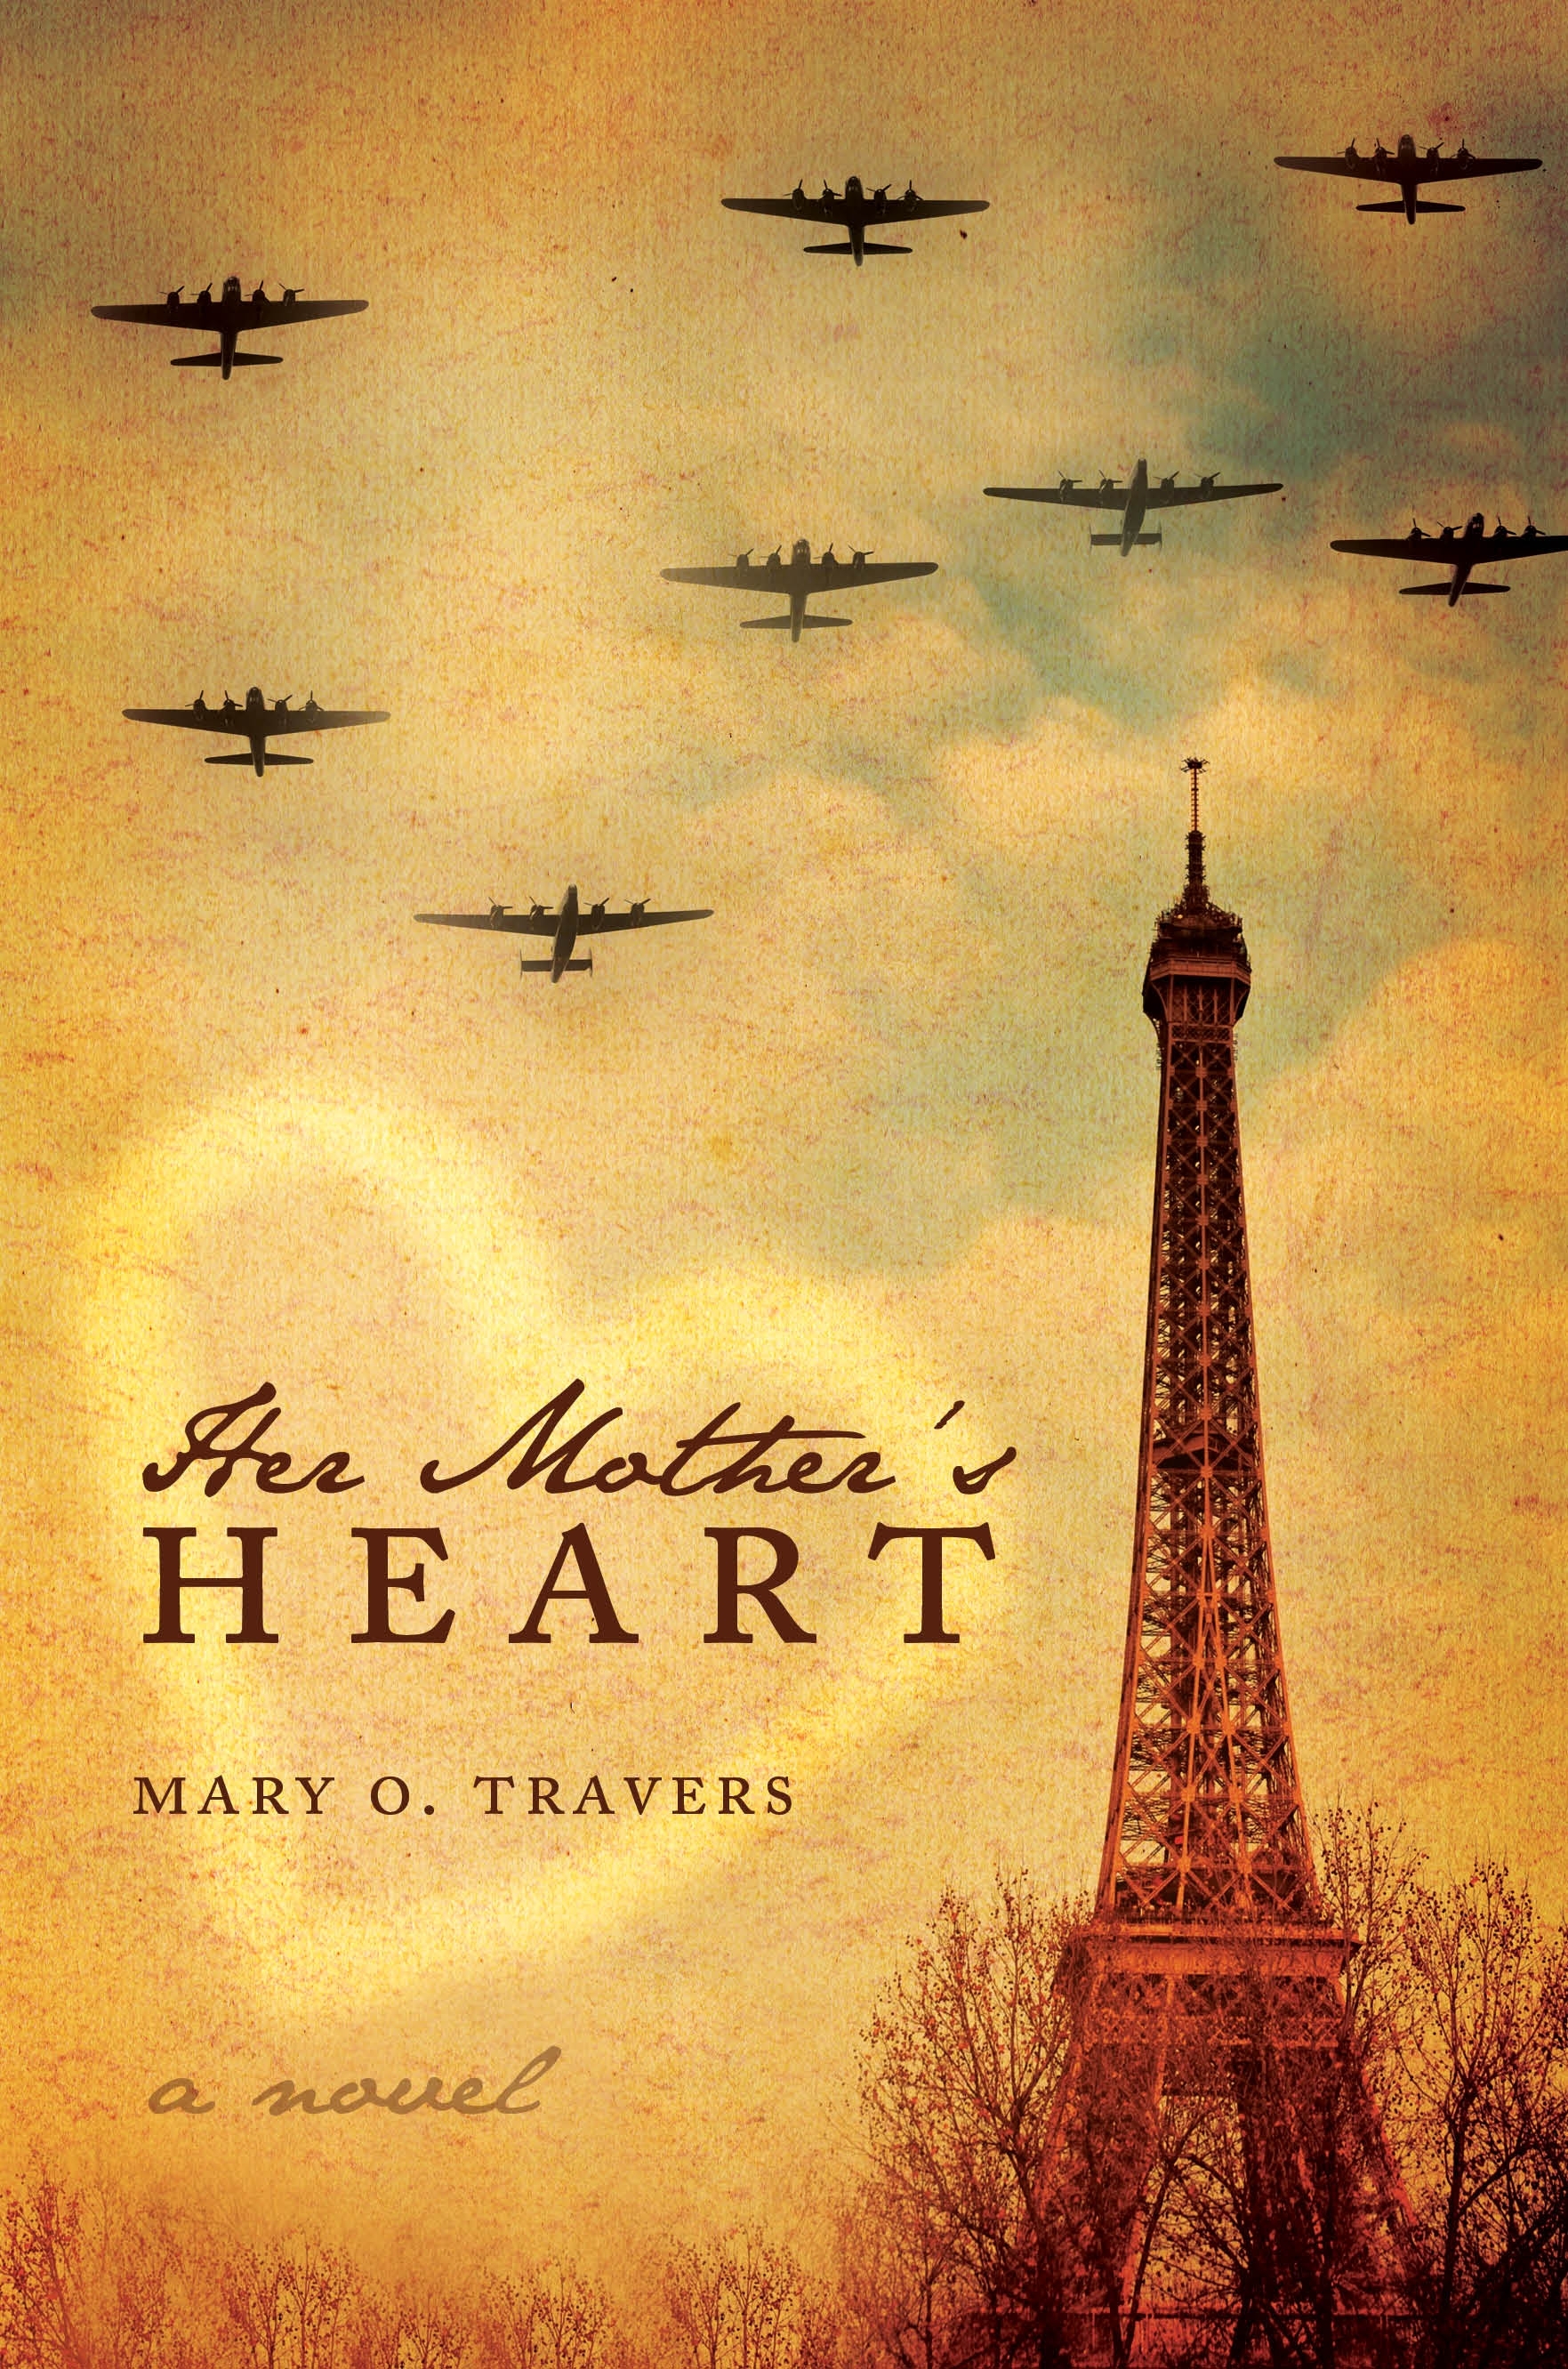 Book Review: “Her Mother’s Heart” by Mary O. Travers